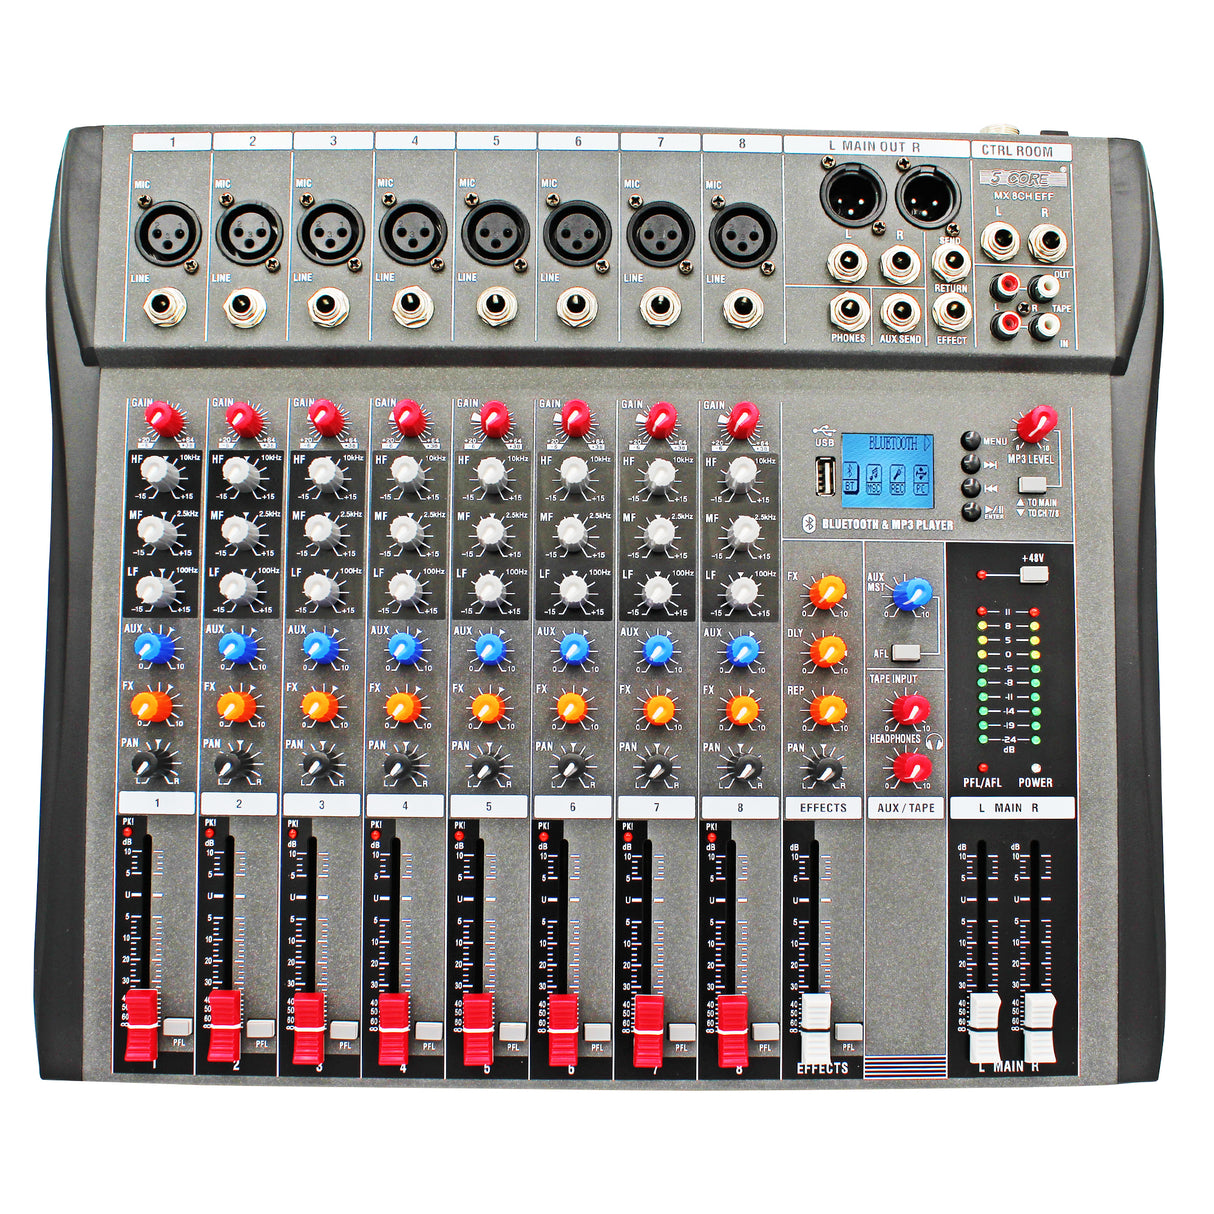 5 Core India Made 8 Channel Compact Studio Mixer with Built-In Effects & USB Interface Digital Mixer for Home Studio Recording, Podcast DJs & more MX 8CH EFF